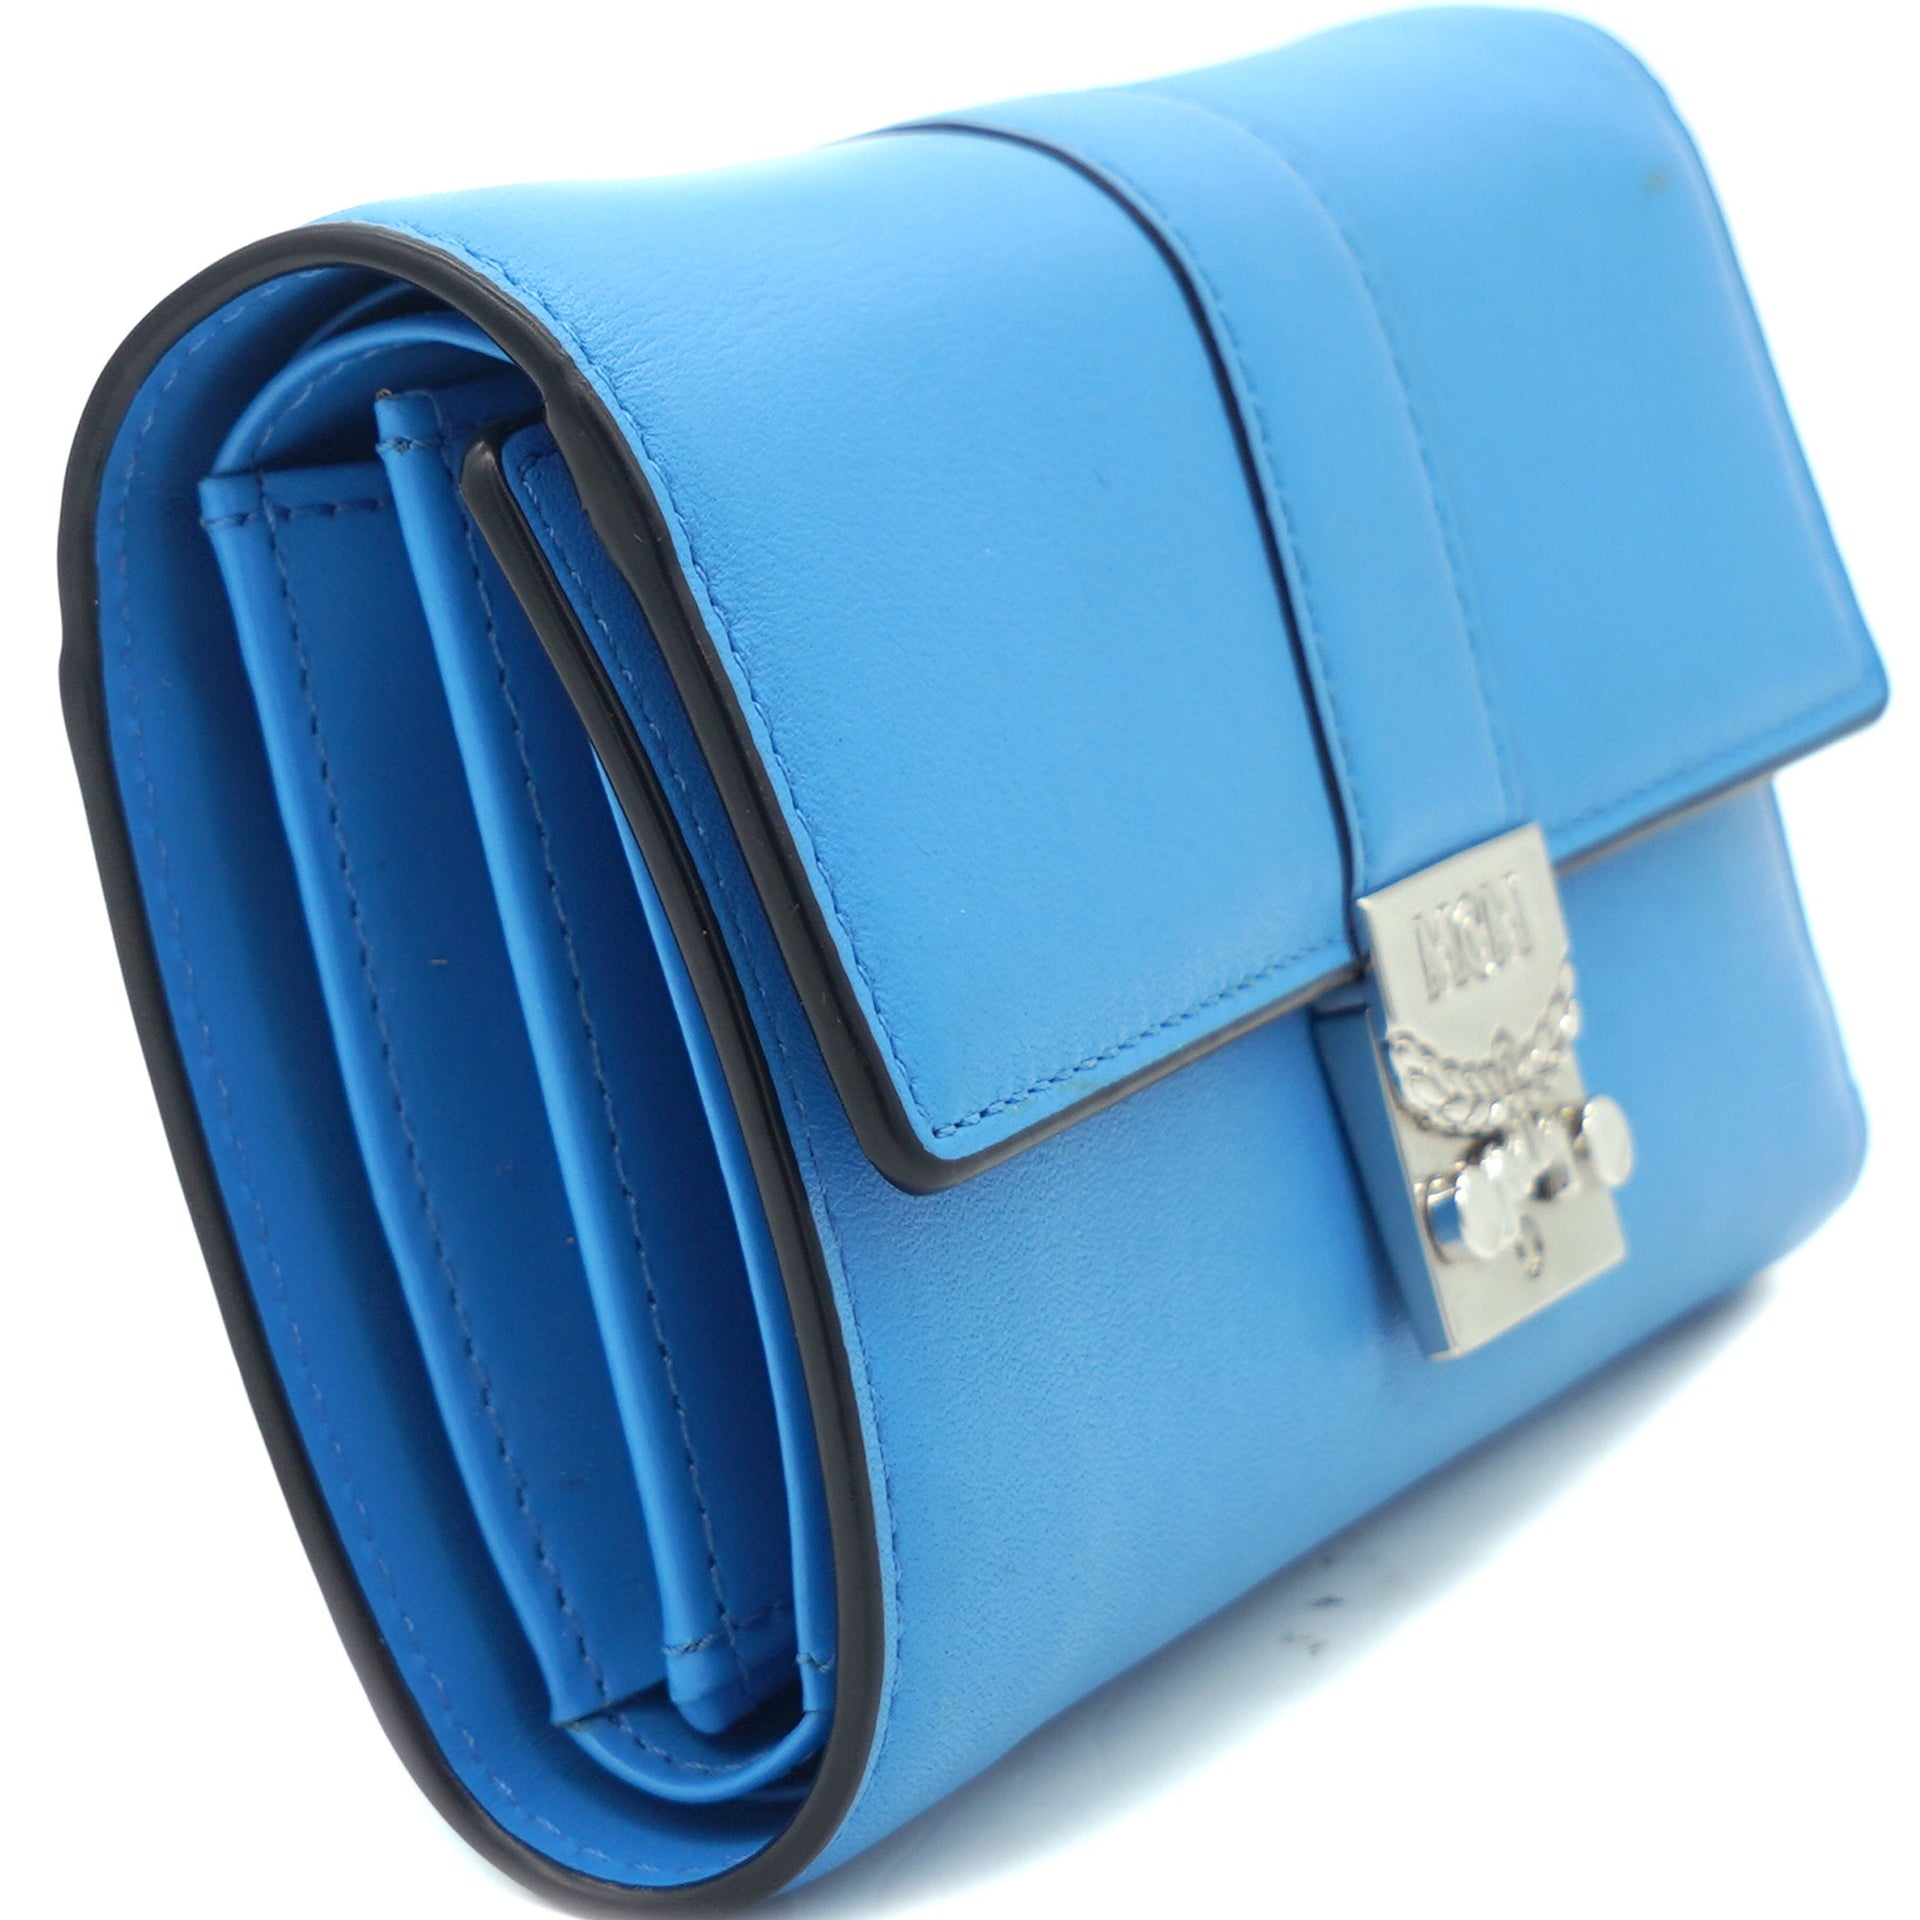 Leather Compact Wallet Blue